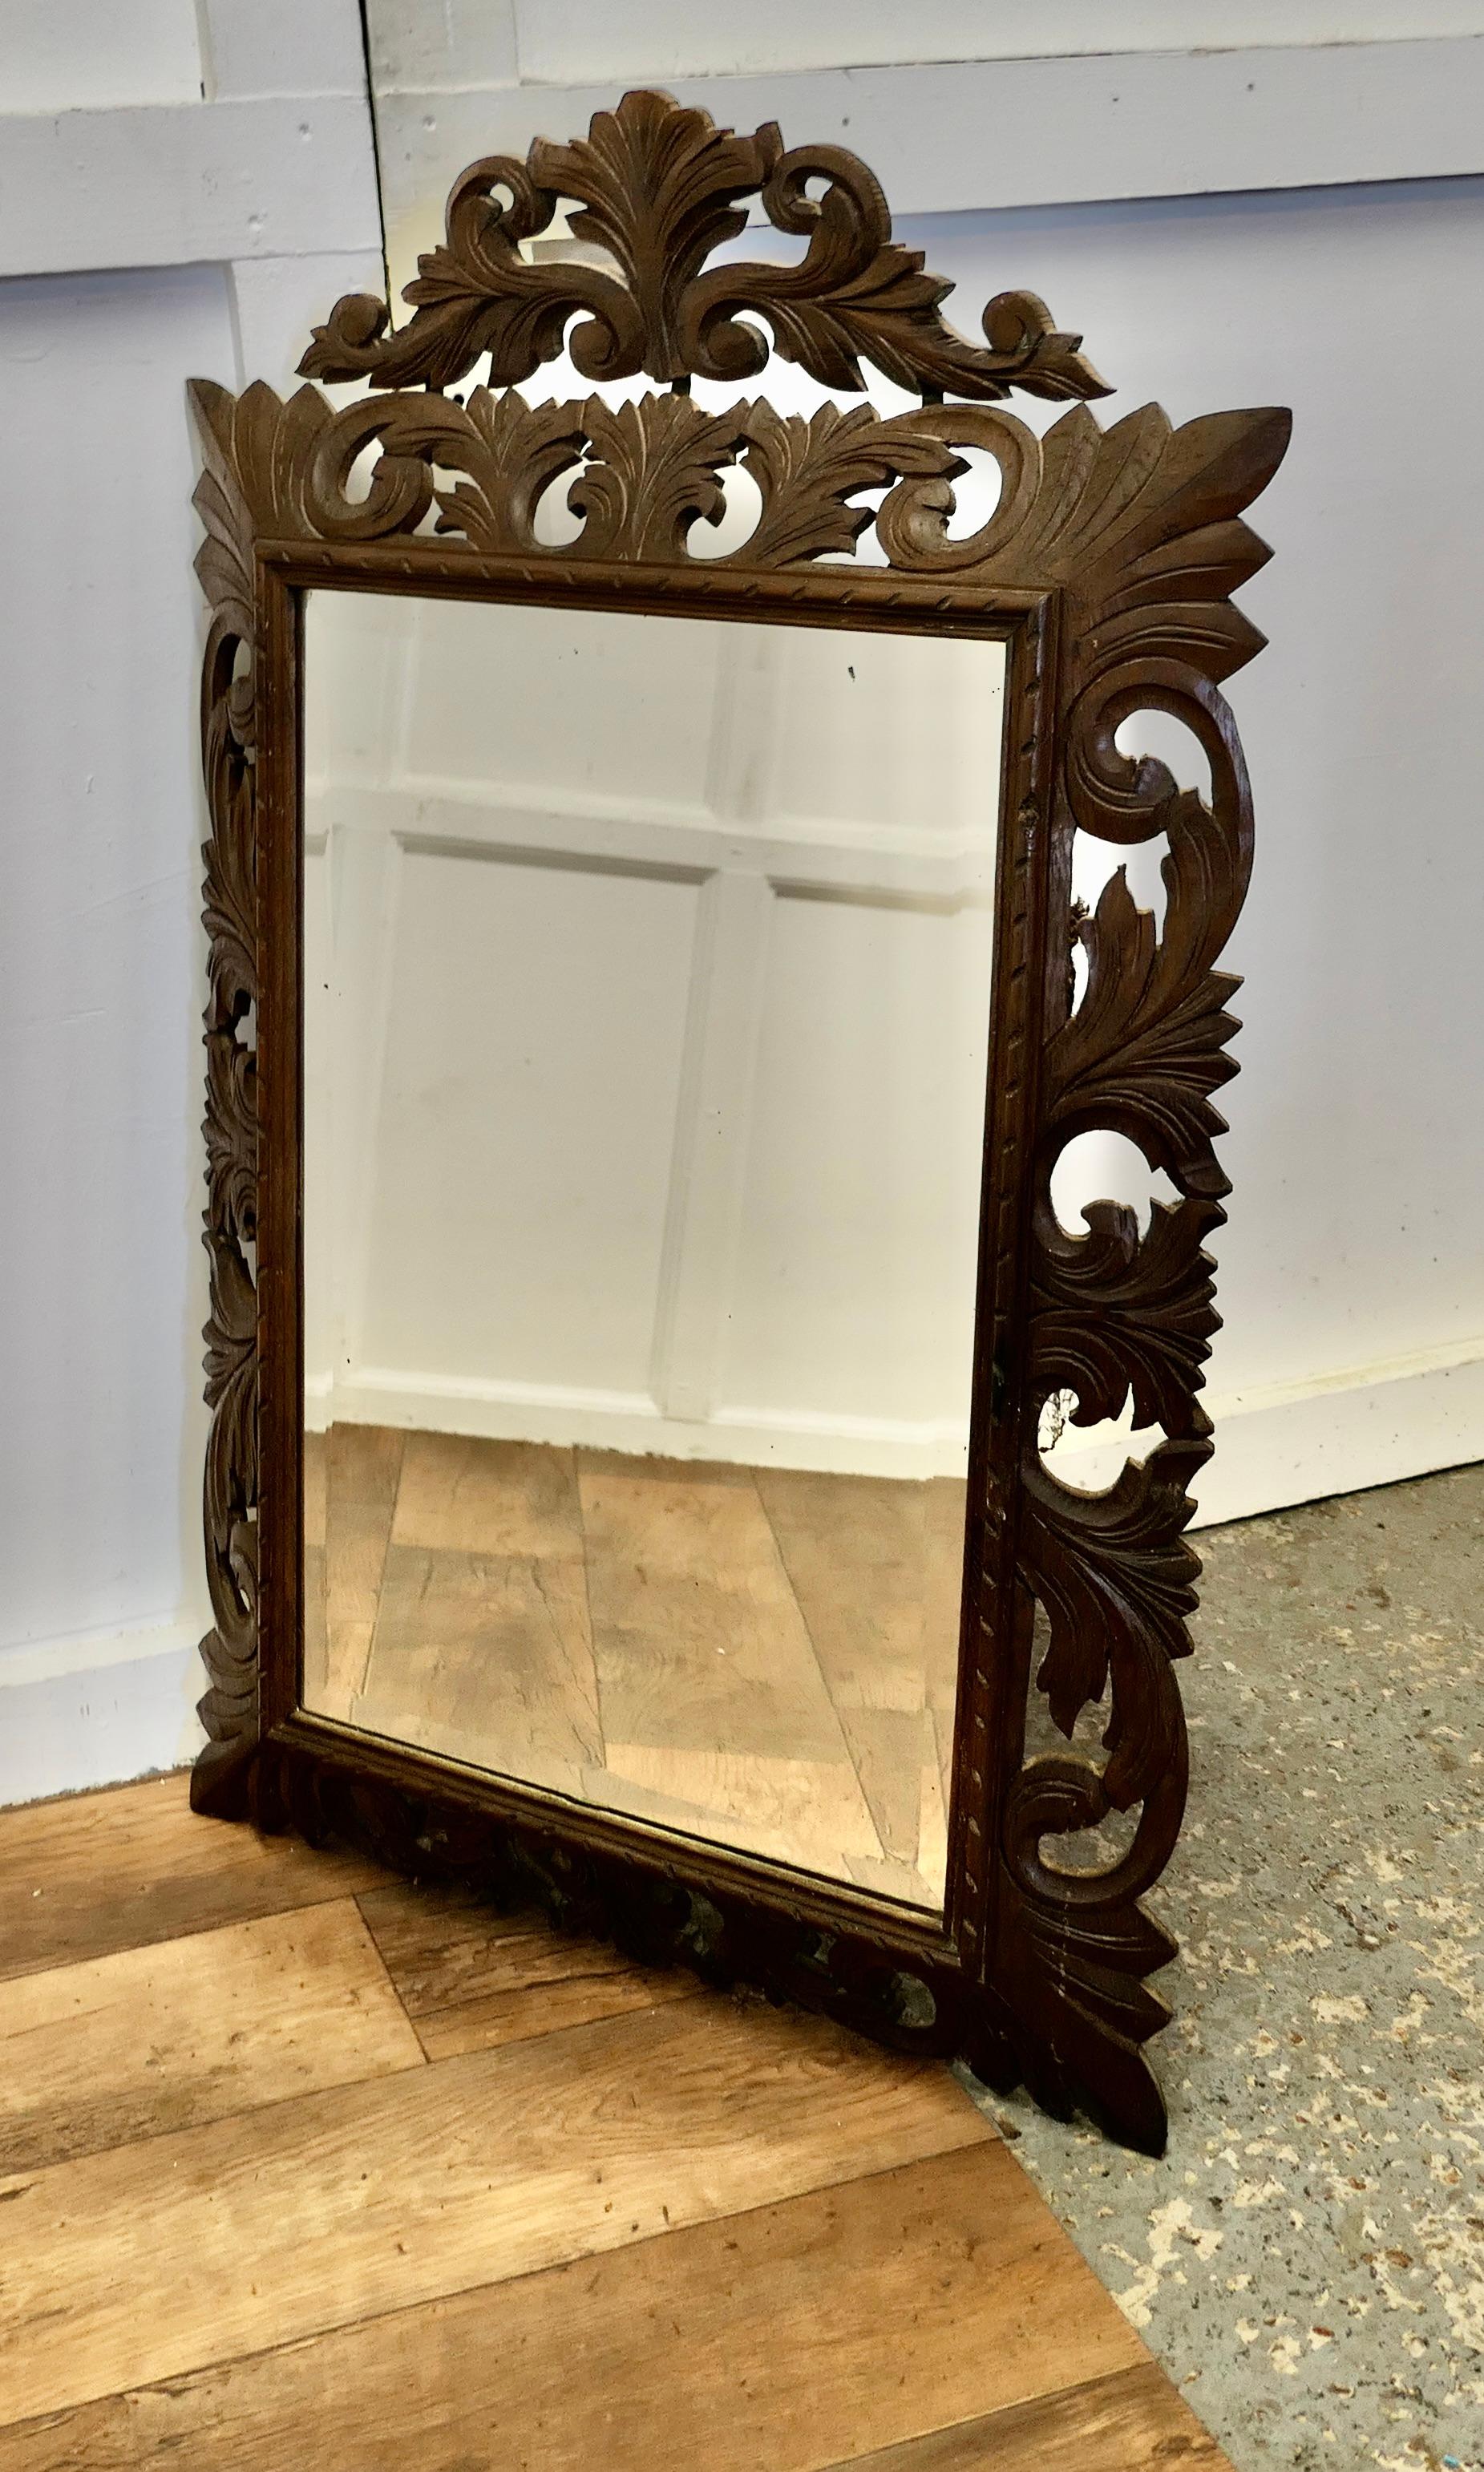 French Carved Gothic Oak Wall Mirror

The Oak Mirror Frame is Crisply Carved with acanthus leaves and a top crest, the Oak Frame is 5” wide and the carvings are in excellent condition
The Original Glass has very light foxing and is otherwise in good